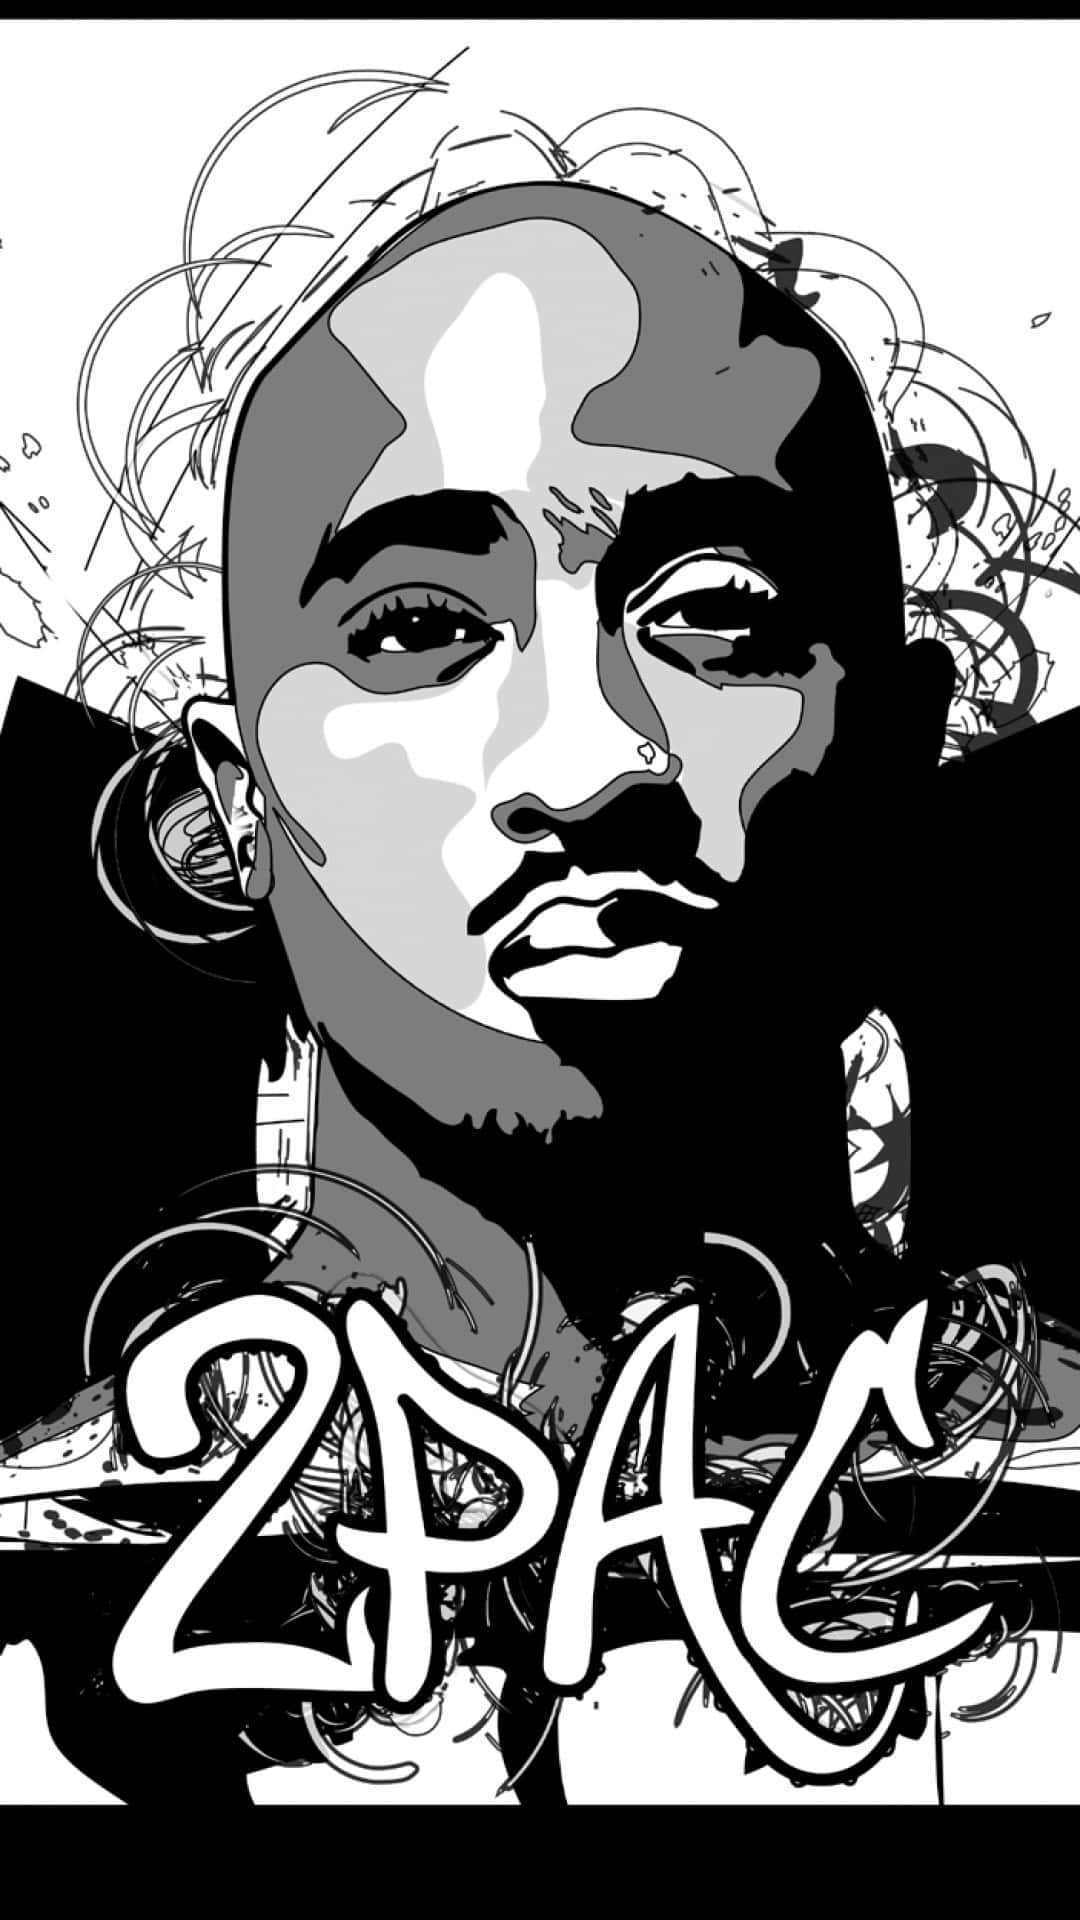 "The Iconic Tupac Showing Support For iPhones" Wallpaper